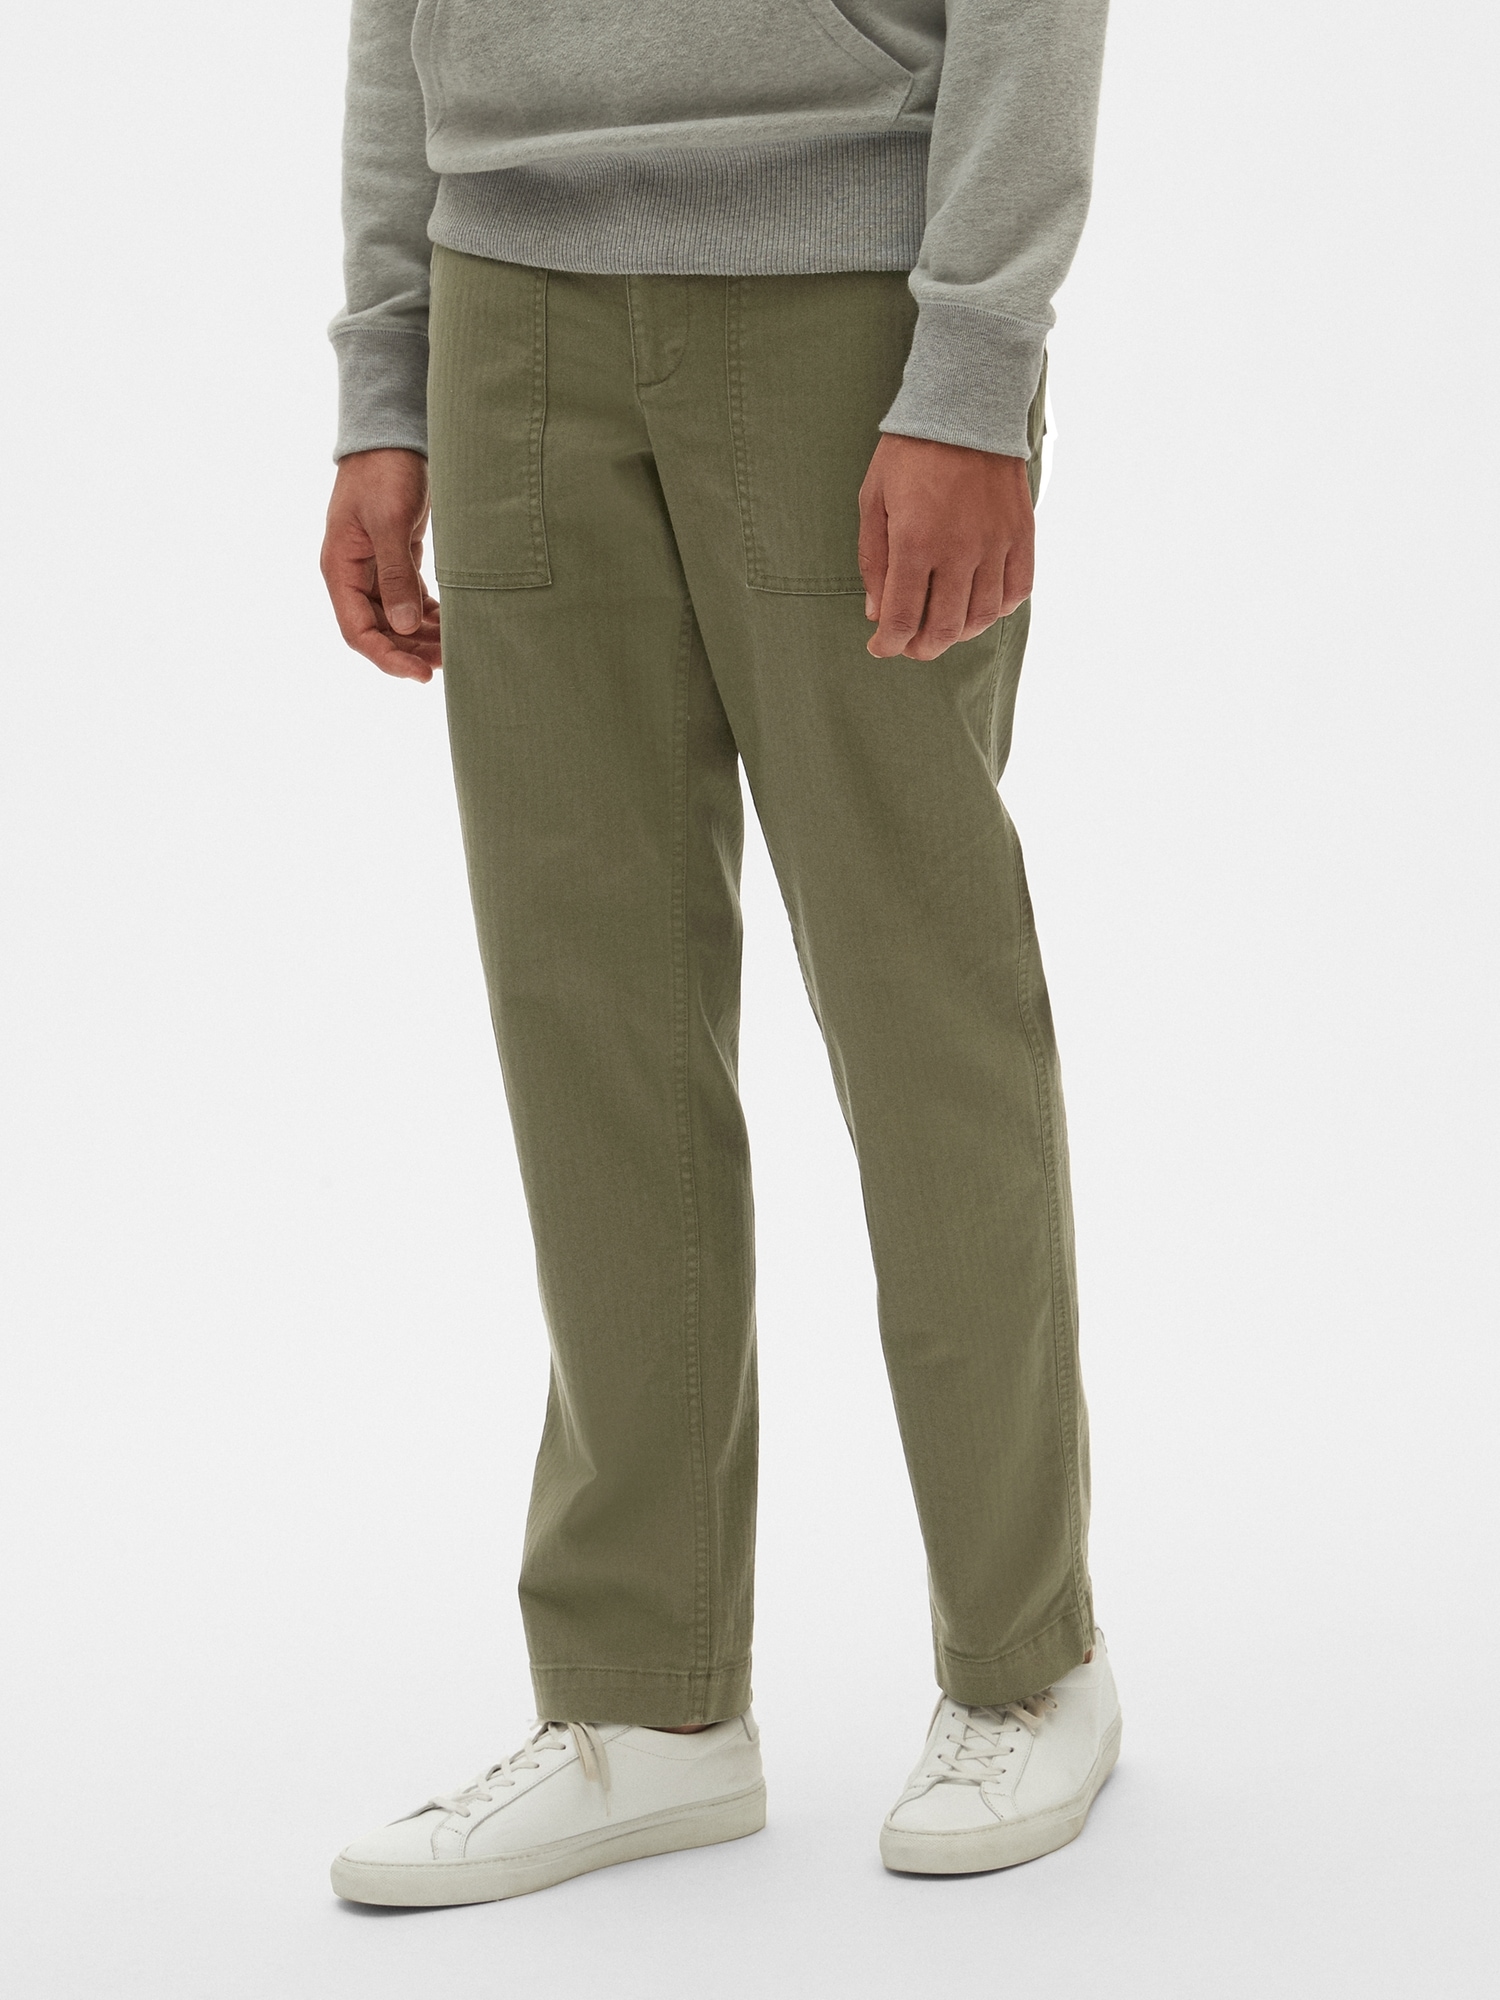 Utility Pants in Straight Fit with GapFlex | Gap